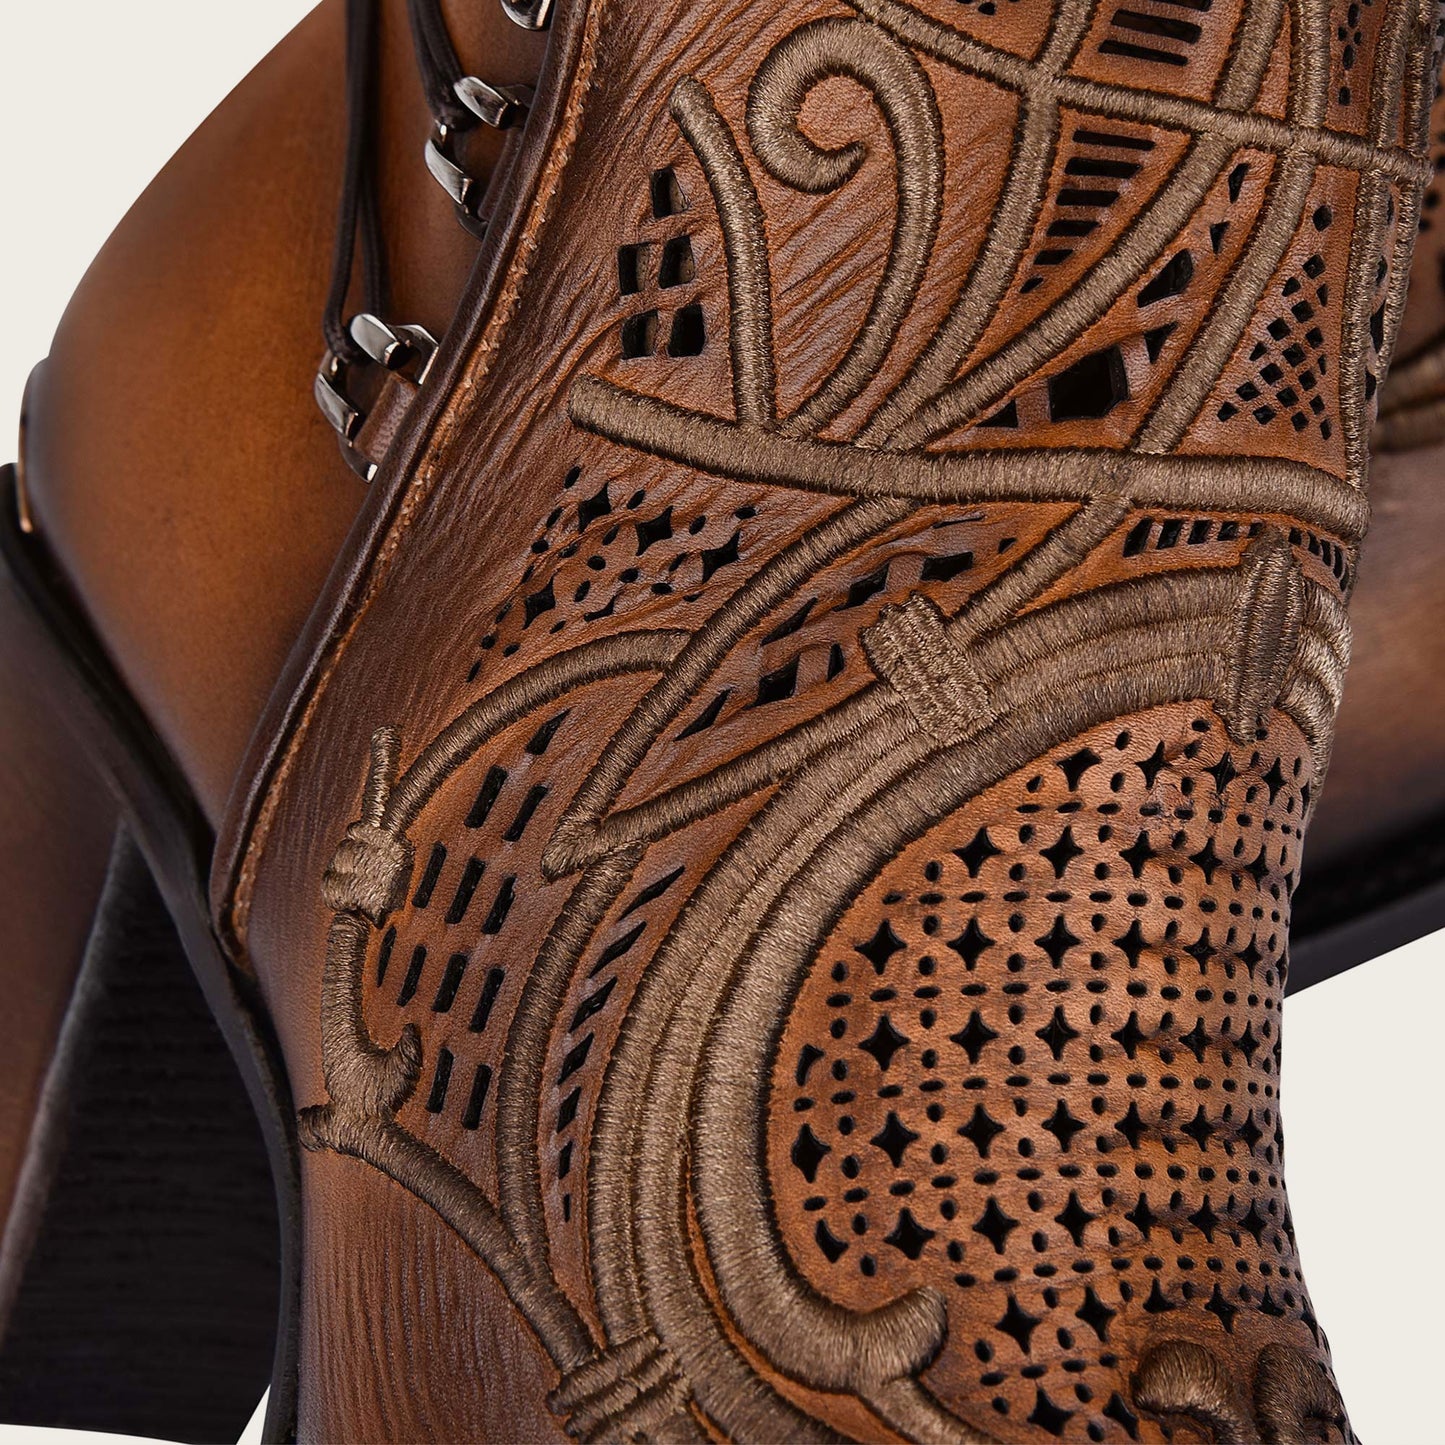 Embroidered honey leather bootie with organic motifs and metallic details.